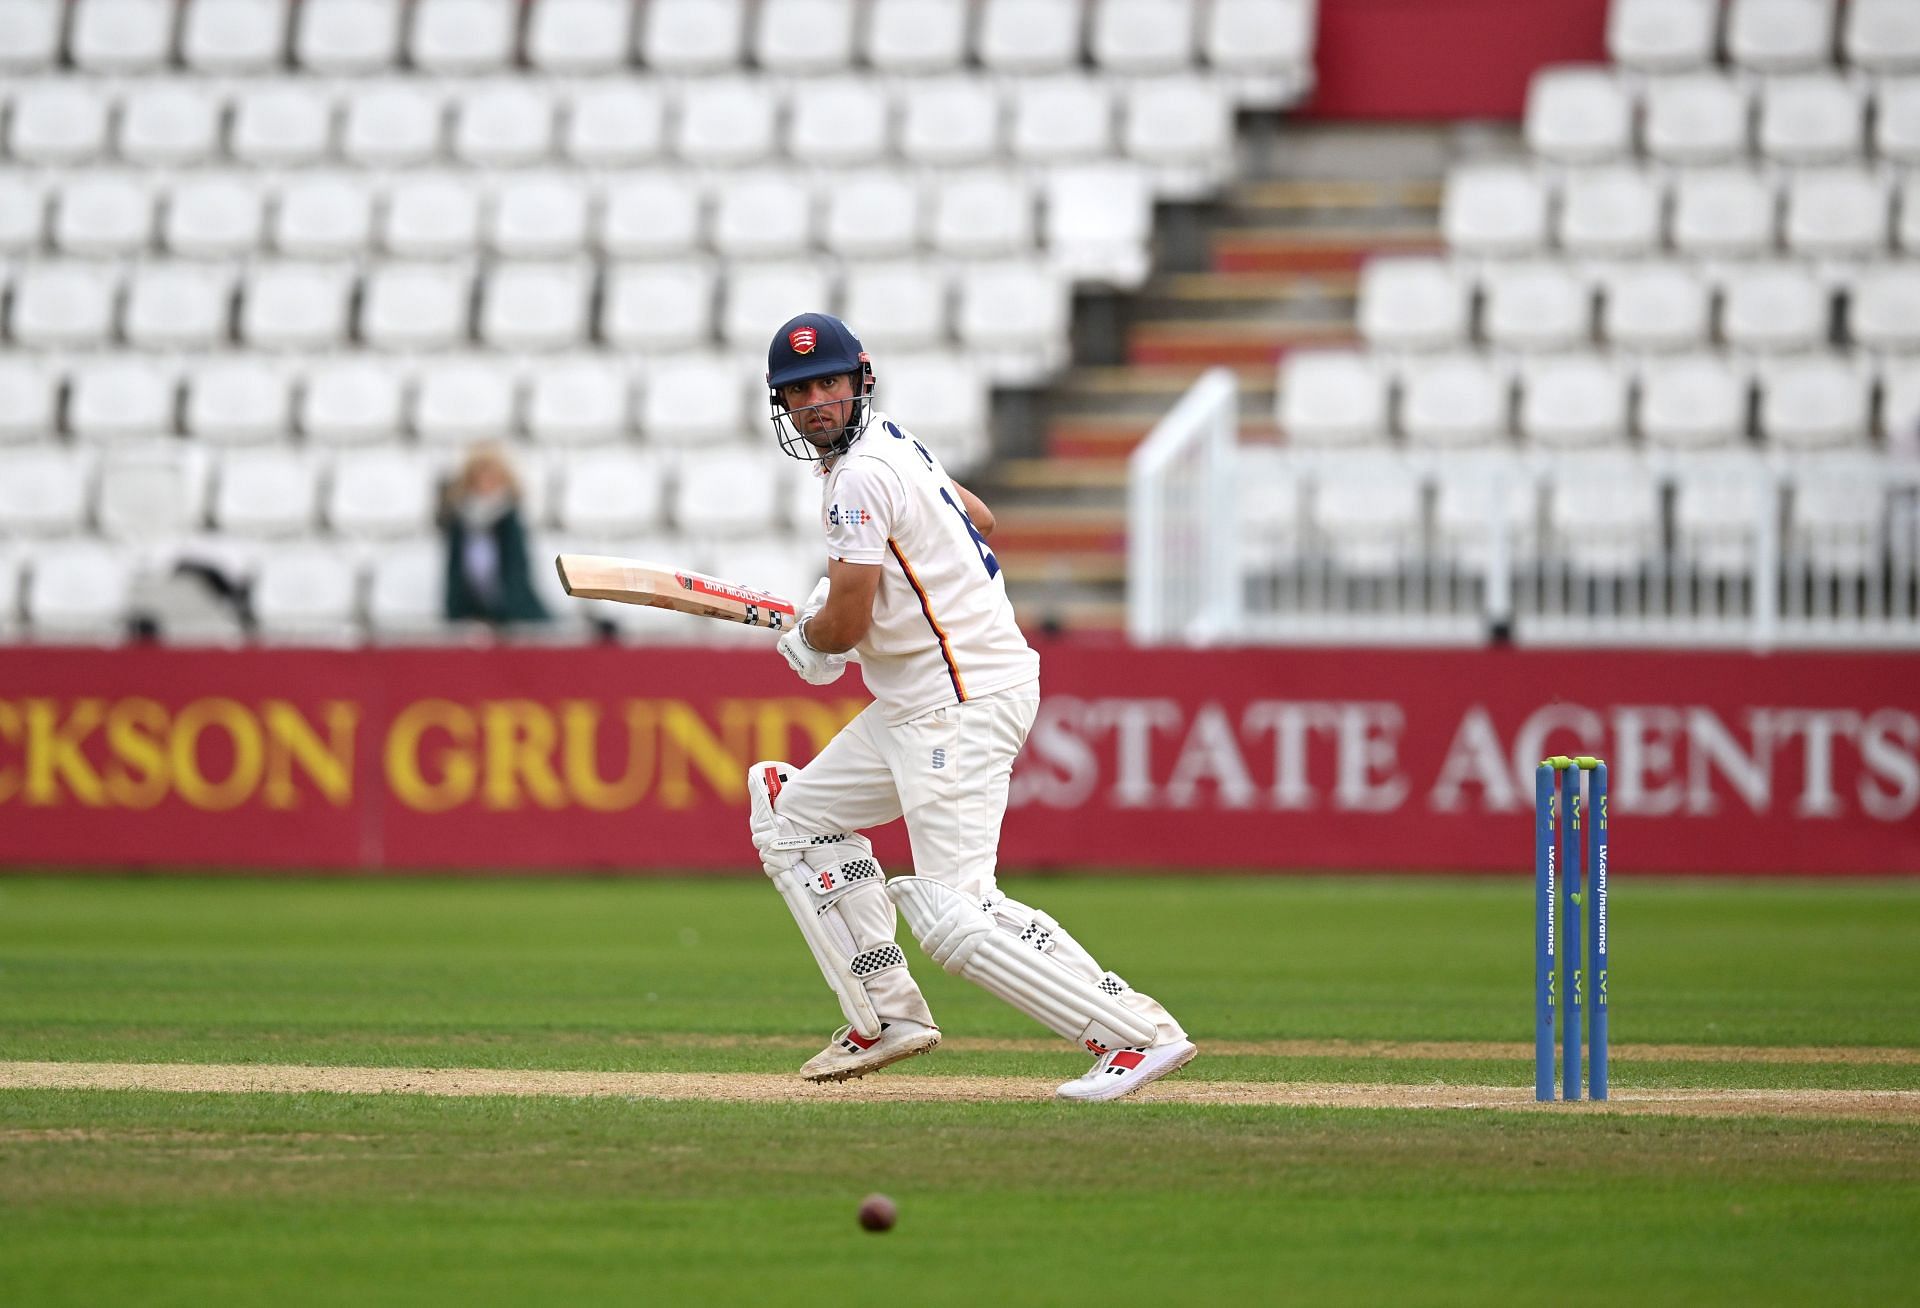 Sir Alastair Cook in action in county cricket.